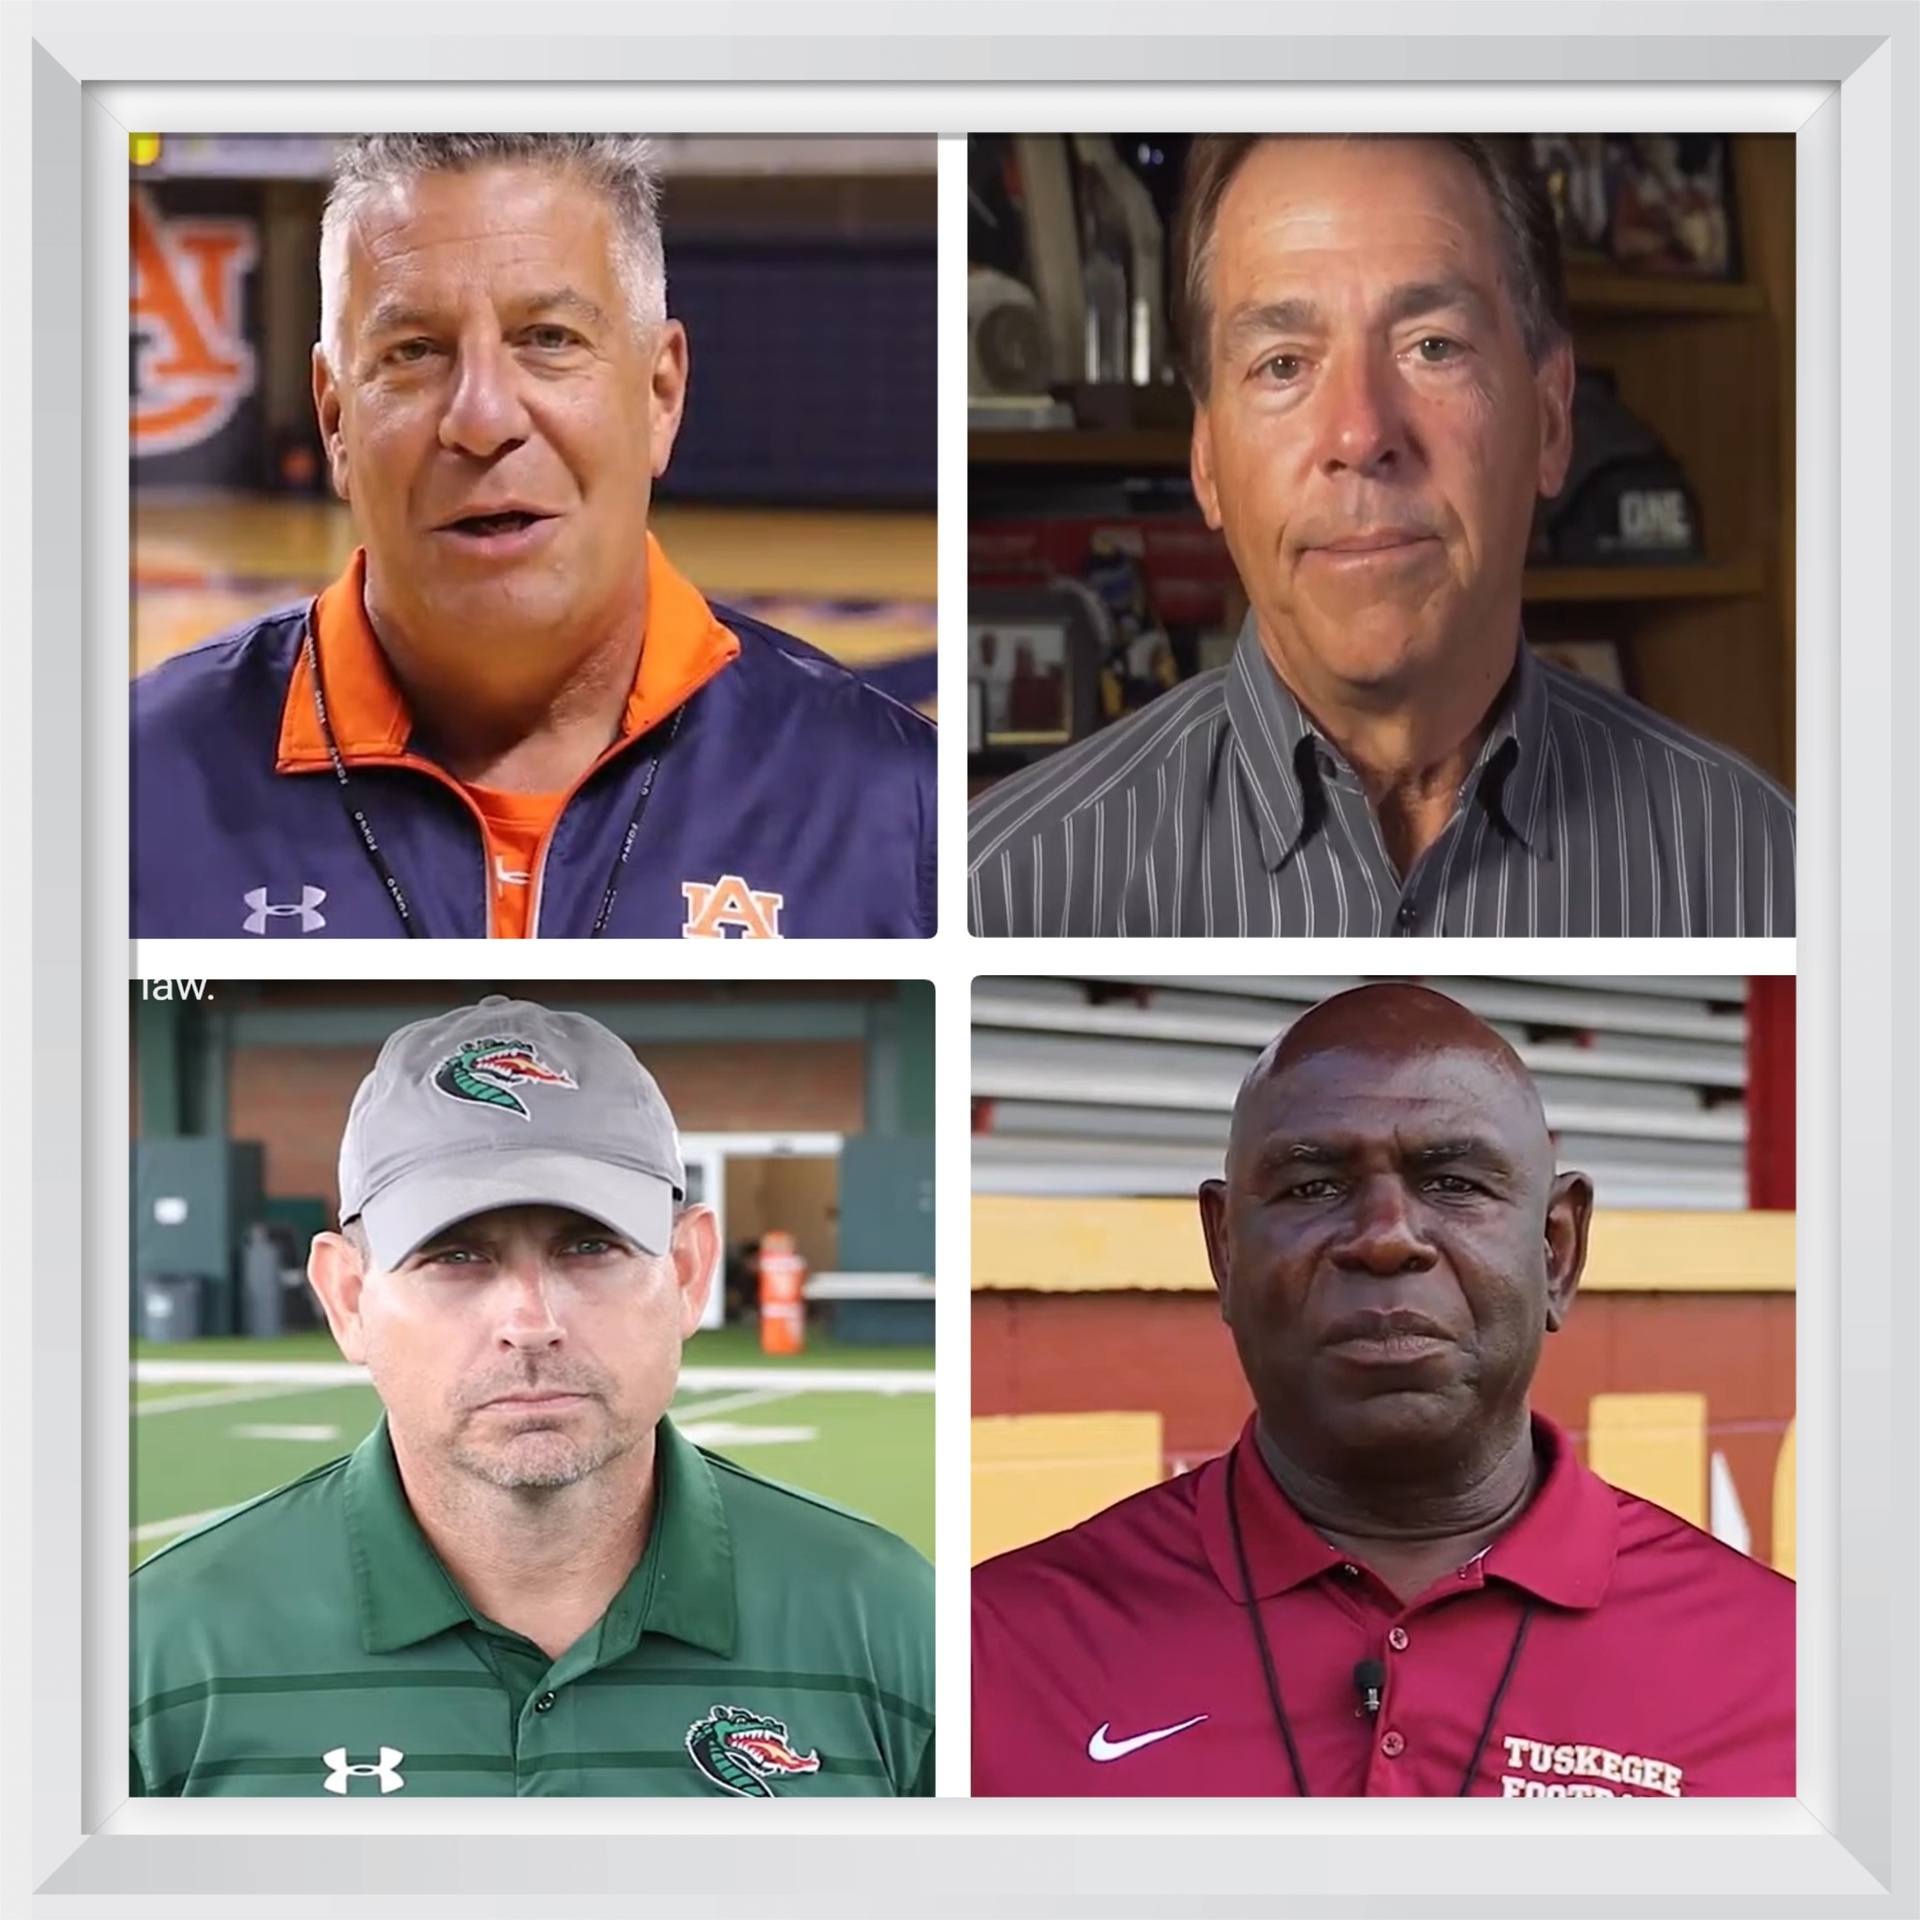 State College Coaches Support Coach Safely Law In PSA